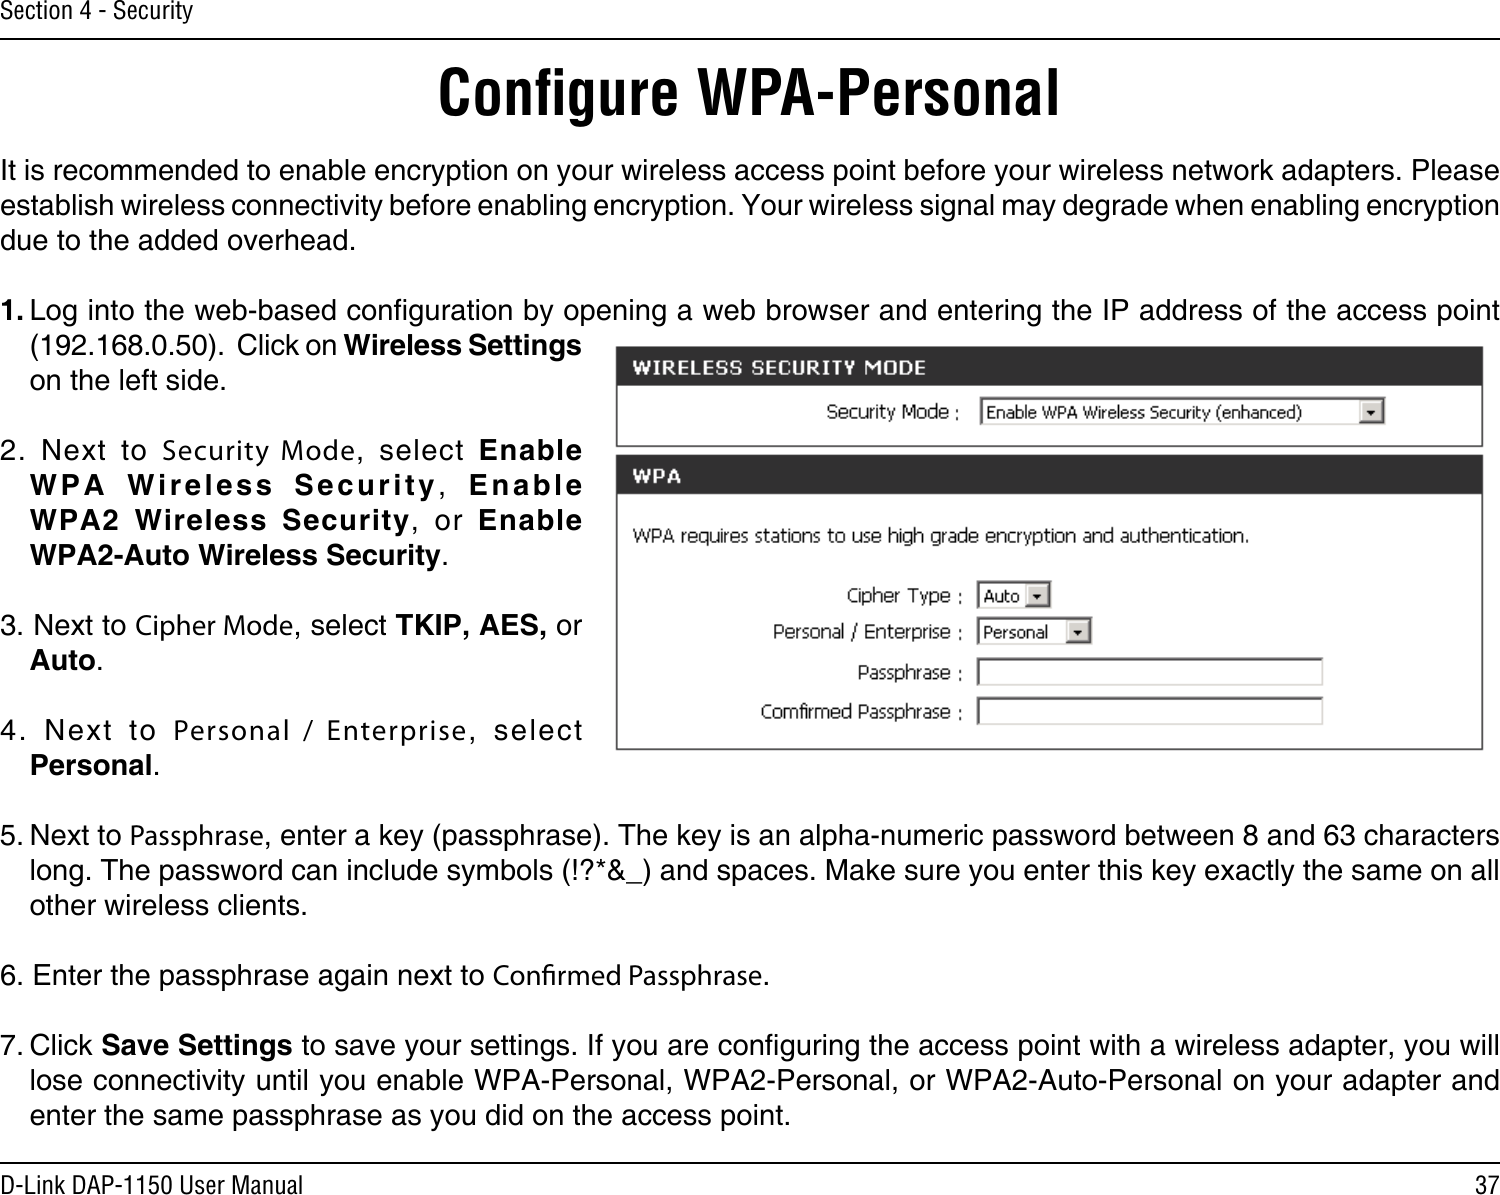 37D-Link DAP-1150 User ManualSection 4 - SecurityConﬁgure WPA-PersonalIt is recommended to enable encryption on your wireless access point before your wireless network adapters. Please establish wireless connectivity before enabling encryption. Your wireless signal may degrade when enabling encryption due to the added overhead.1. Log into the web-based conguration by opening a web browser and entering the IP address of the access point (192.168.0.50).  Click on Wireless Settings on the left side.2.  Next  to  Security Mode,  select  Enable W P A   W i r e l e s s   Se c u r i t y ,   Enable  WPA2  Wireless  Security,  or  Enable  WPA2-Auto Wireless Security.3. Next to Cipher Mode, select TKIP, AES, or Auto.4.  Next  to  Personal /  Enterprise,  select Personal.5. Next to Passphrase, enter a key (passphrase). The key is an alpha-numeric password between 8 and 63 characters long. The password can include symbols (!?*&amp;_) and spaces. Make sure you enter this key exactly the same on all other wireless clients.6. Enter the passphrase again next to Conrmed Passphrase.7. Click Save Settings to save your settings. If you are conguring the access point with a wireless adapter, you will lose connectivity until you enable WPA-Personal, WPA2-Personal, or WPA2-Auto-Personal on your adapter and enter the same passphrase as you did on the access point.